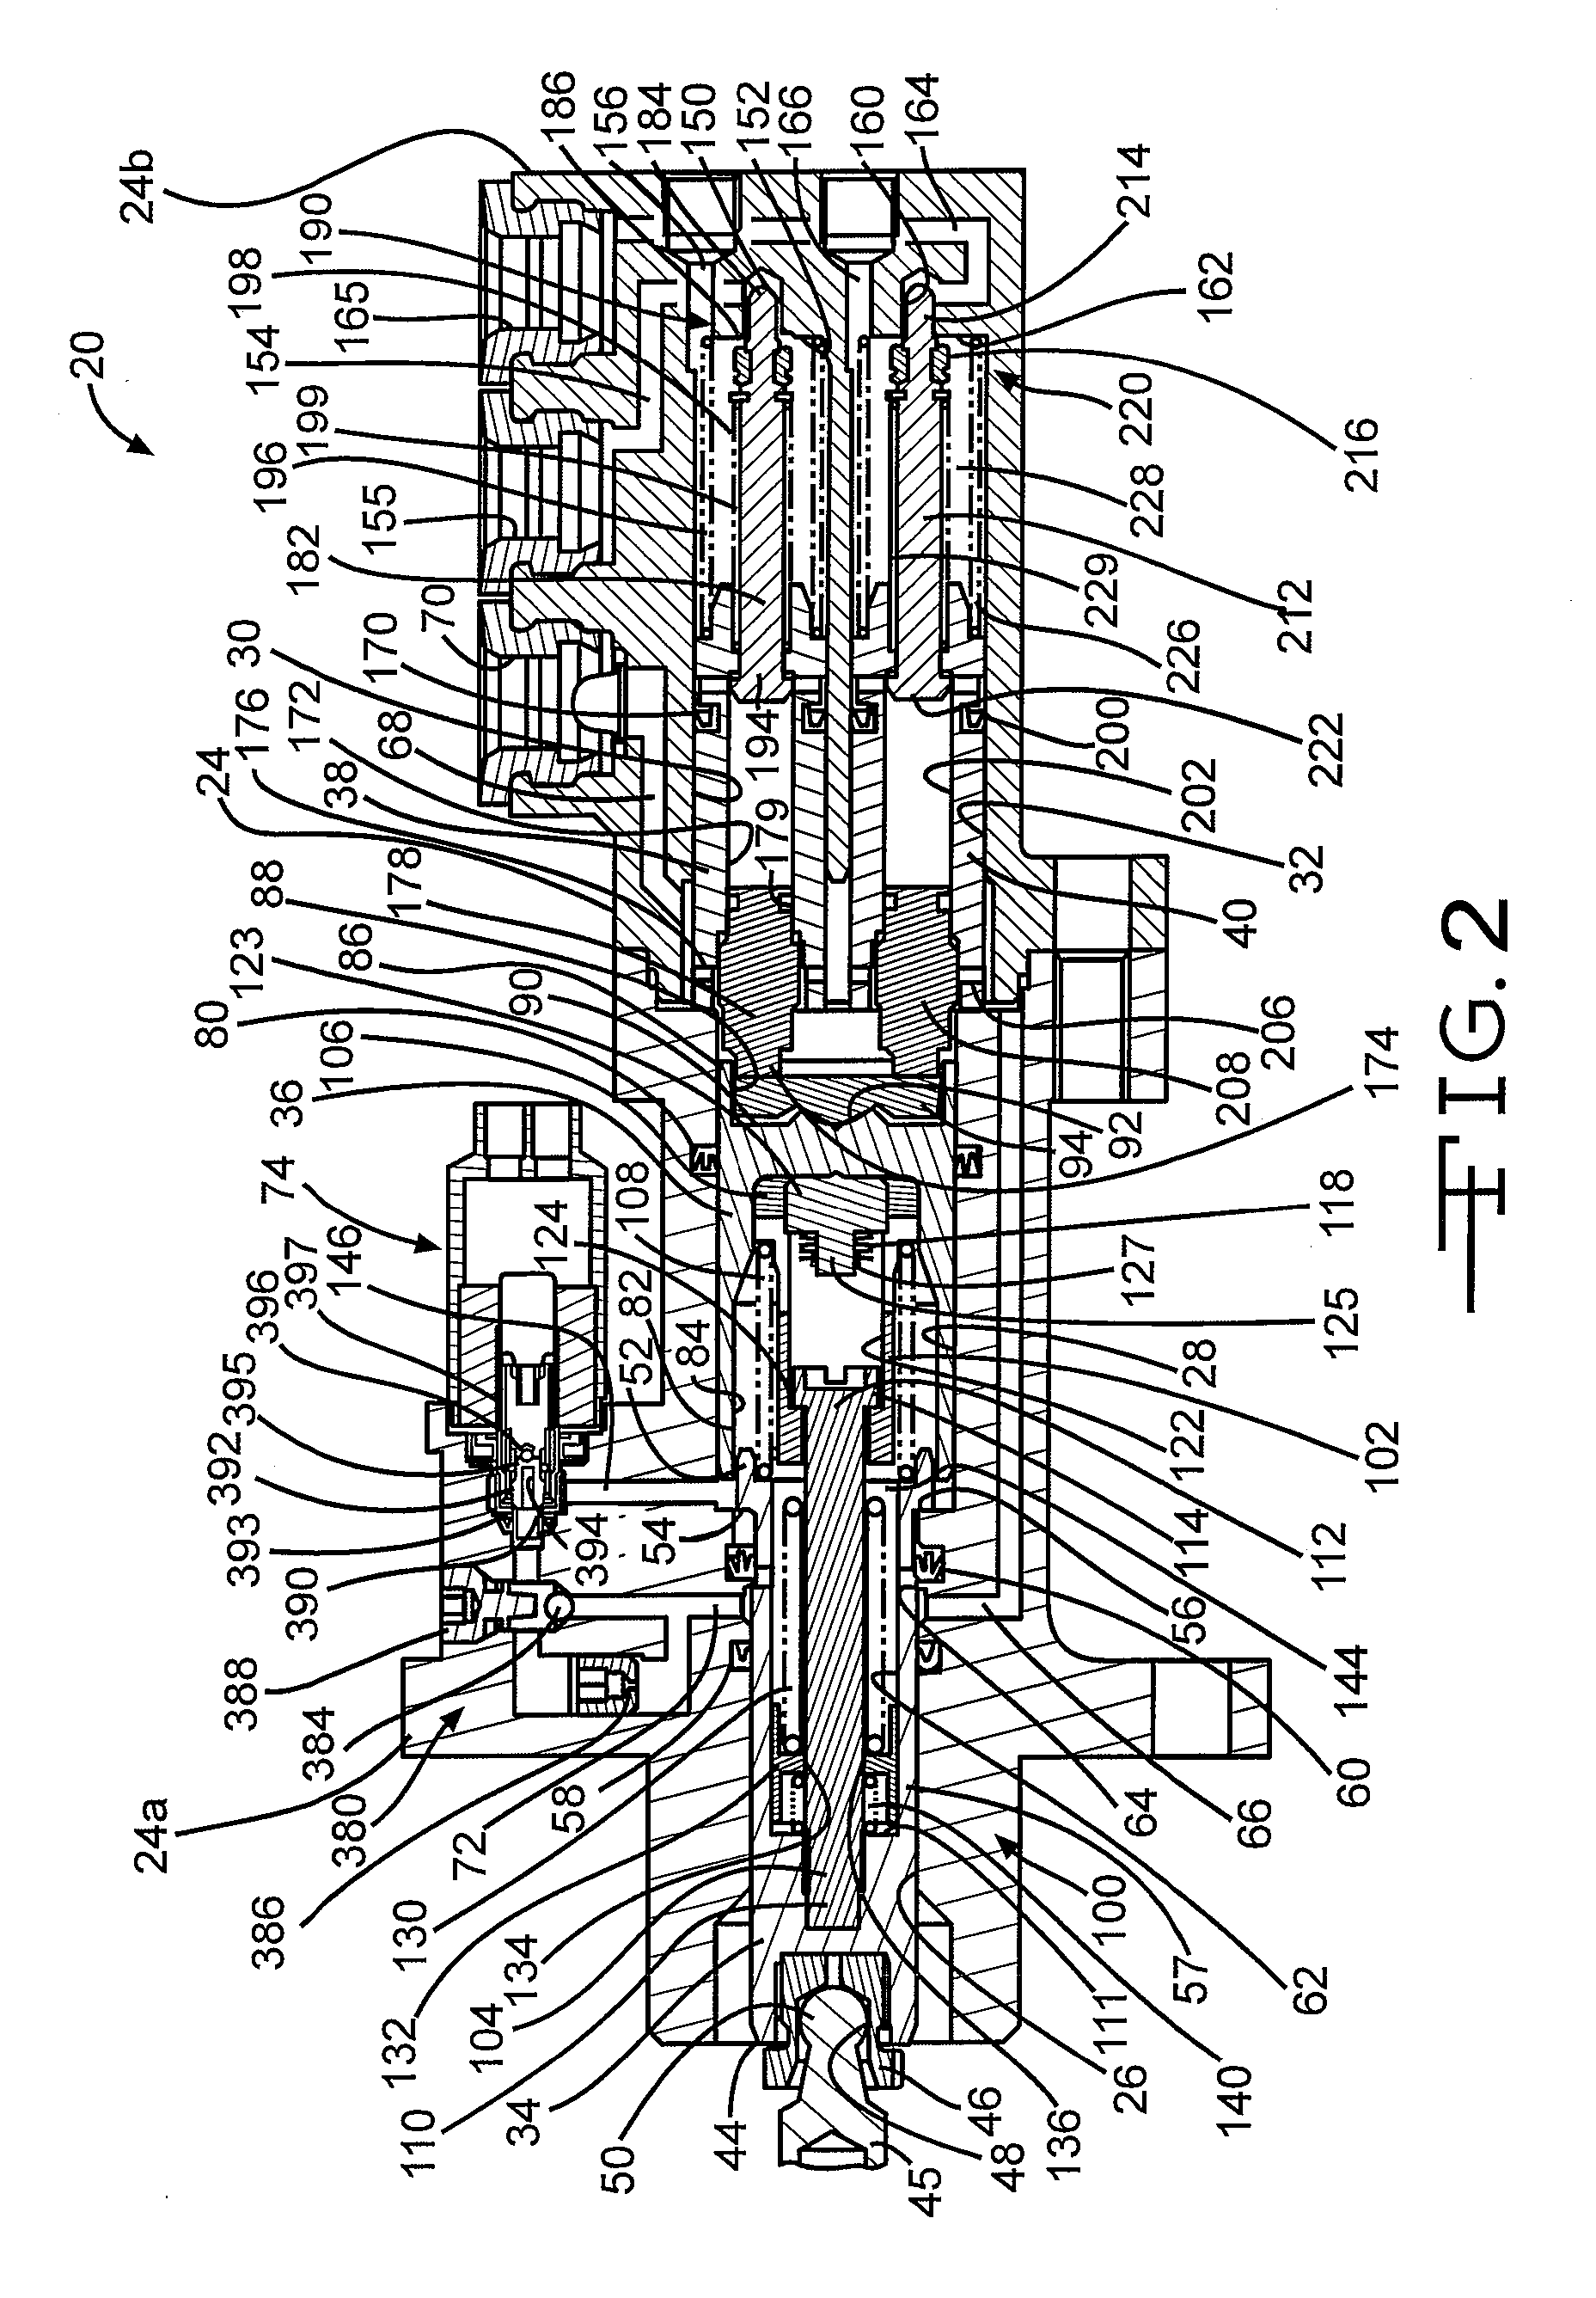 Hydraulic brake system with controlled boost